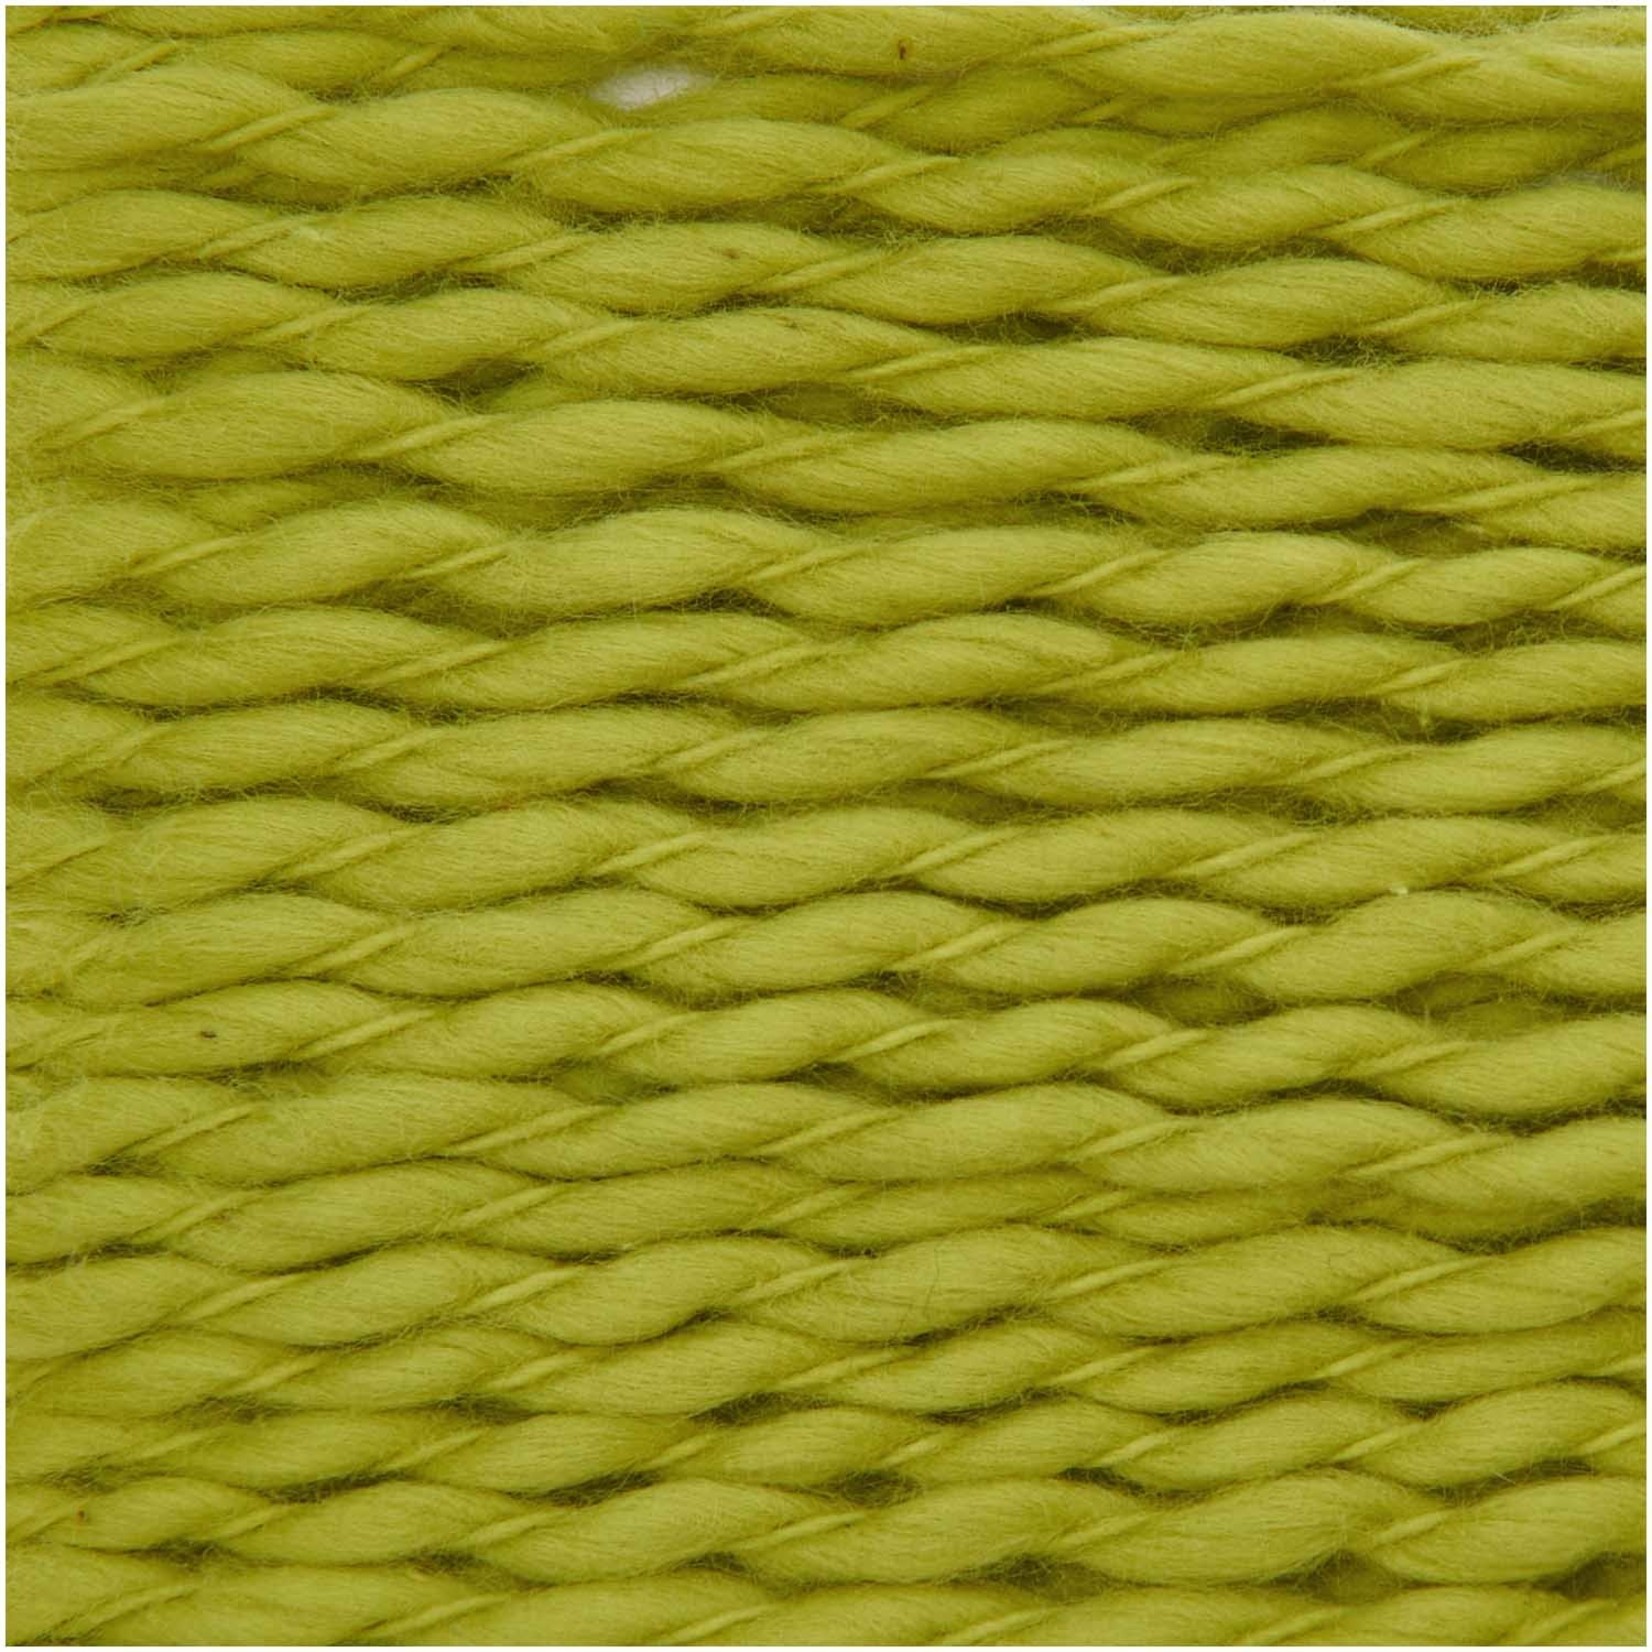 Rico So Cool  So Soft Cotton Chunky 024 Lime